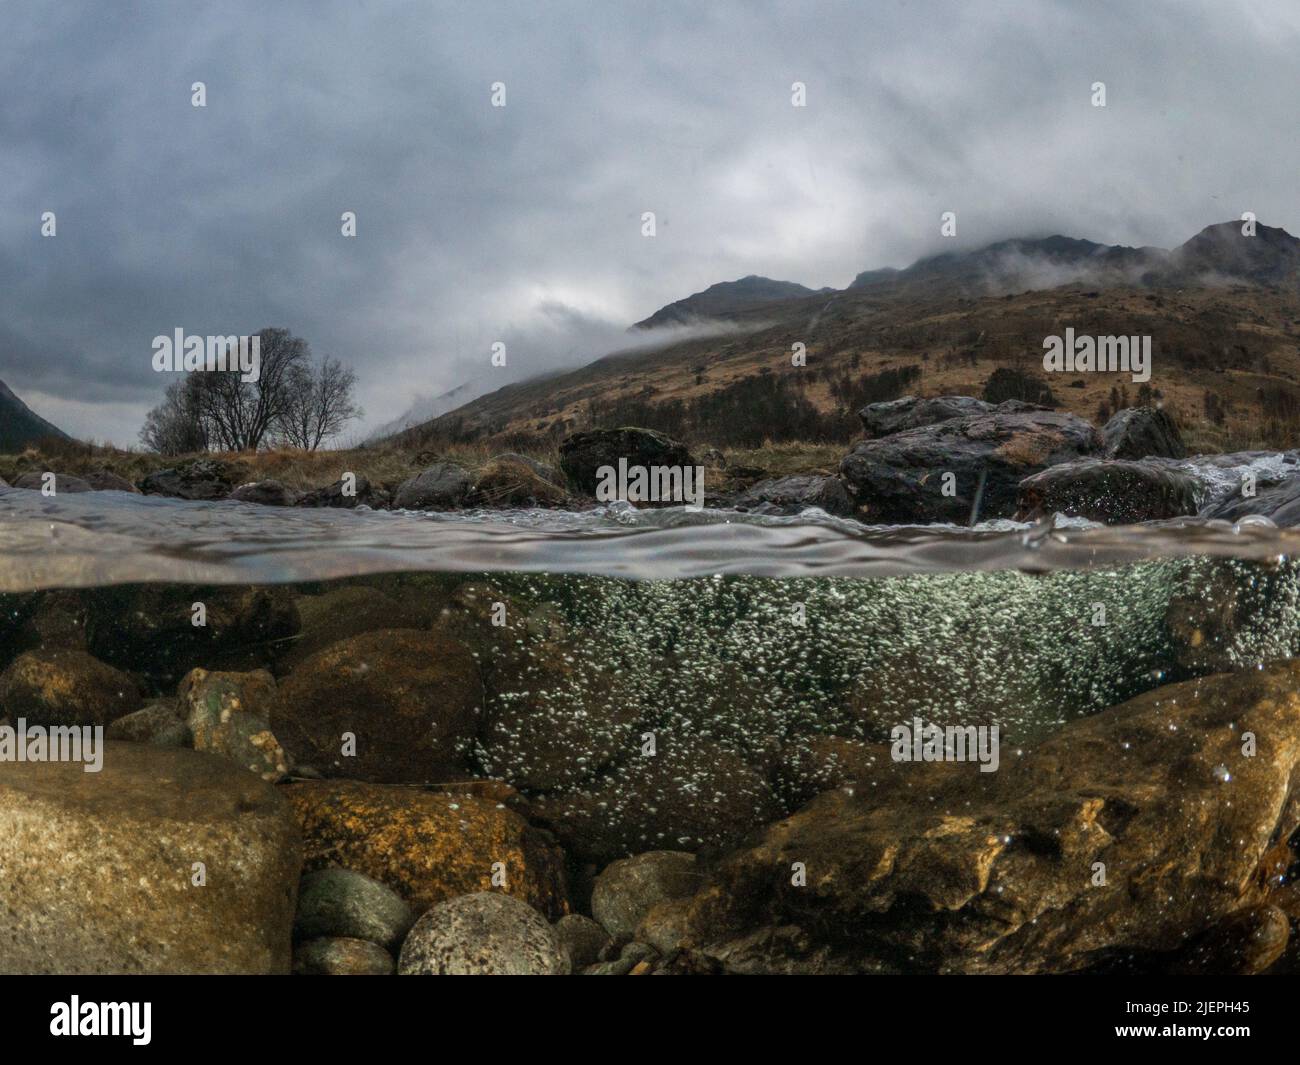 Water flows of the rocks underneath the River Kinglas. Hills, trees and dark stormy clouds are in the background. Stock Photo